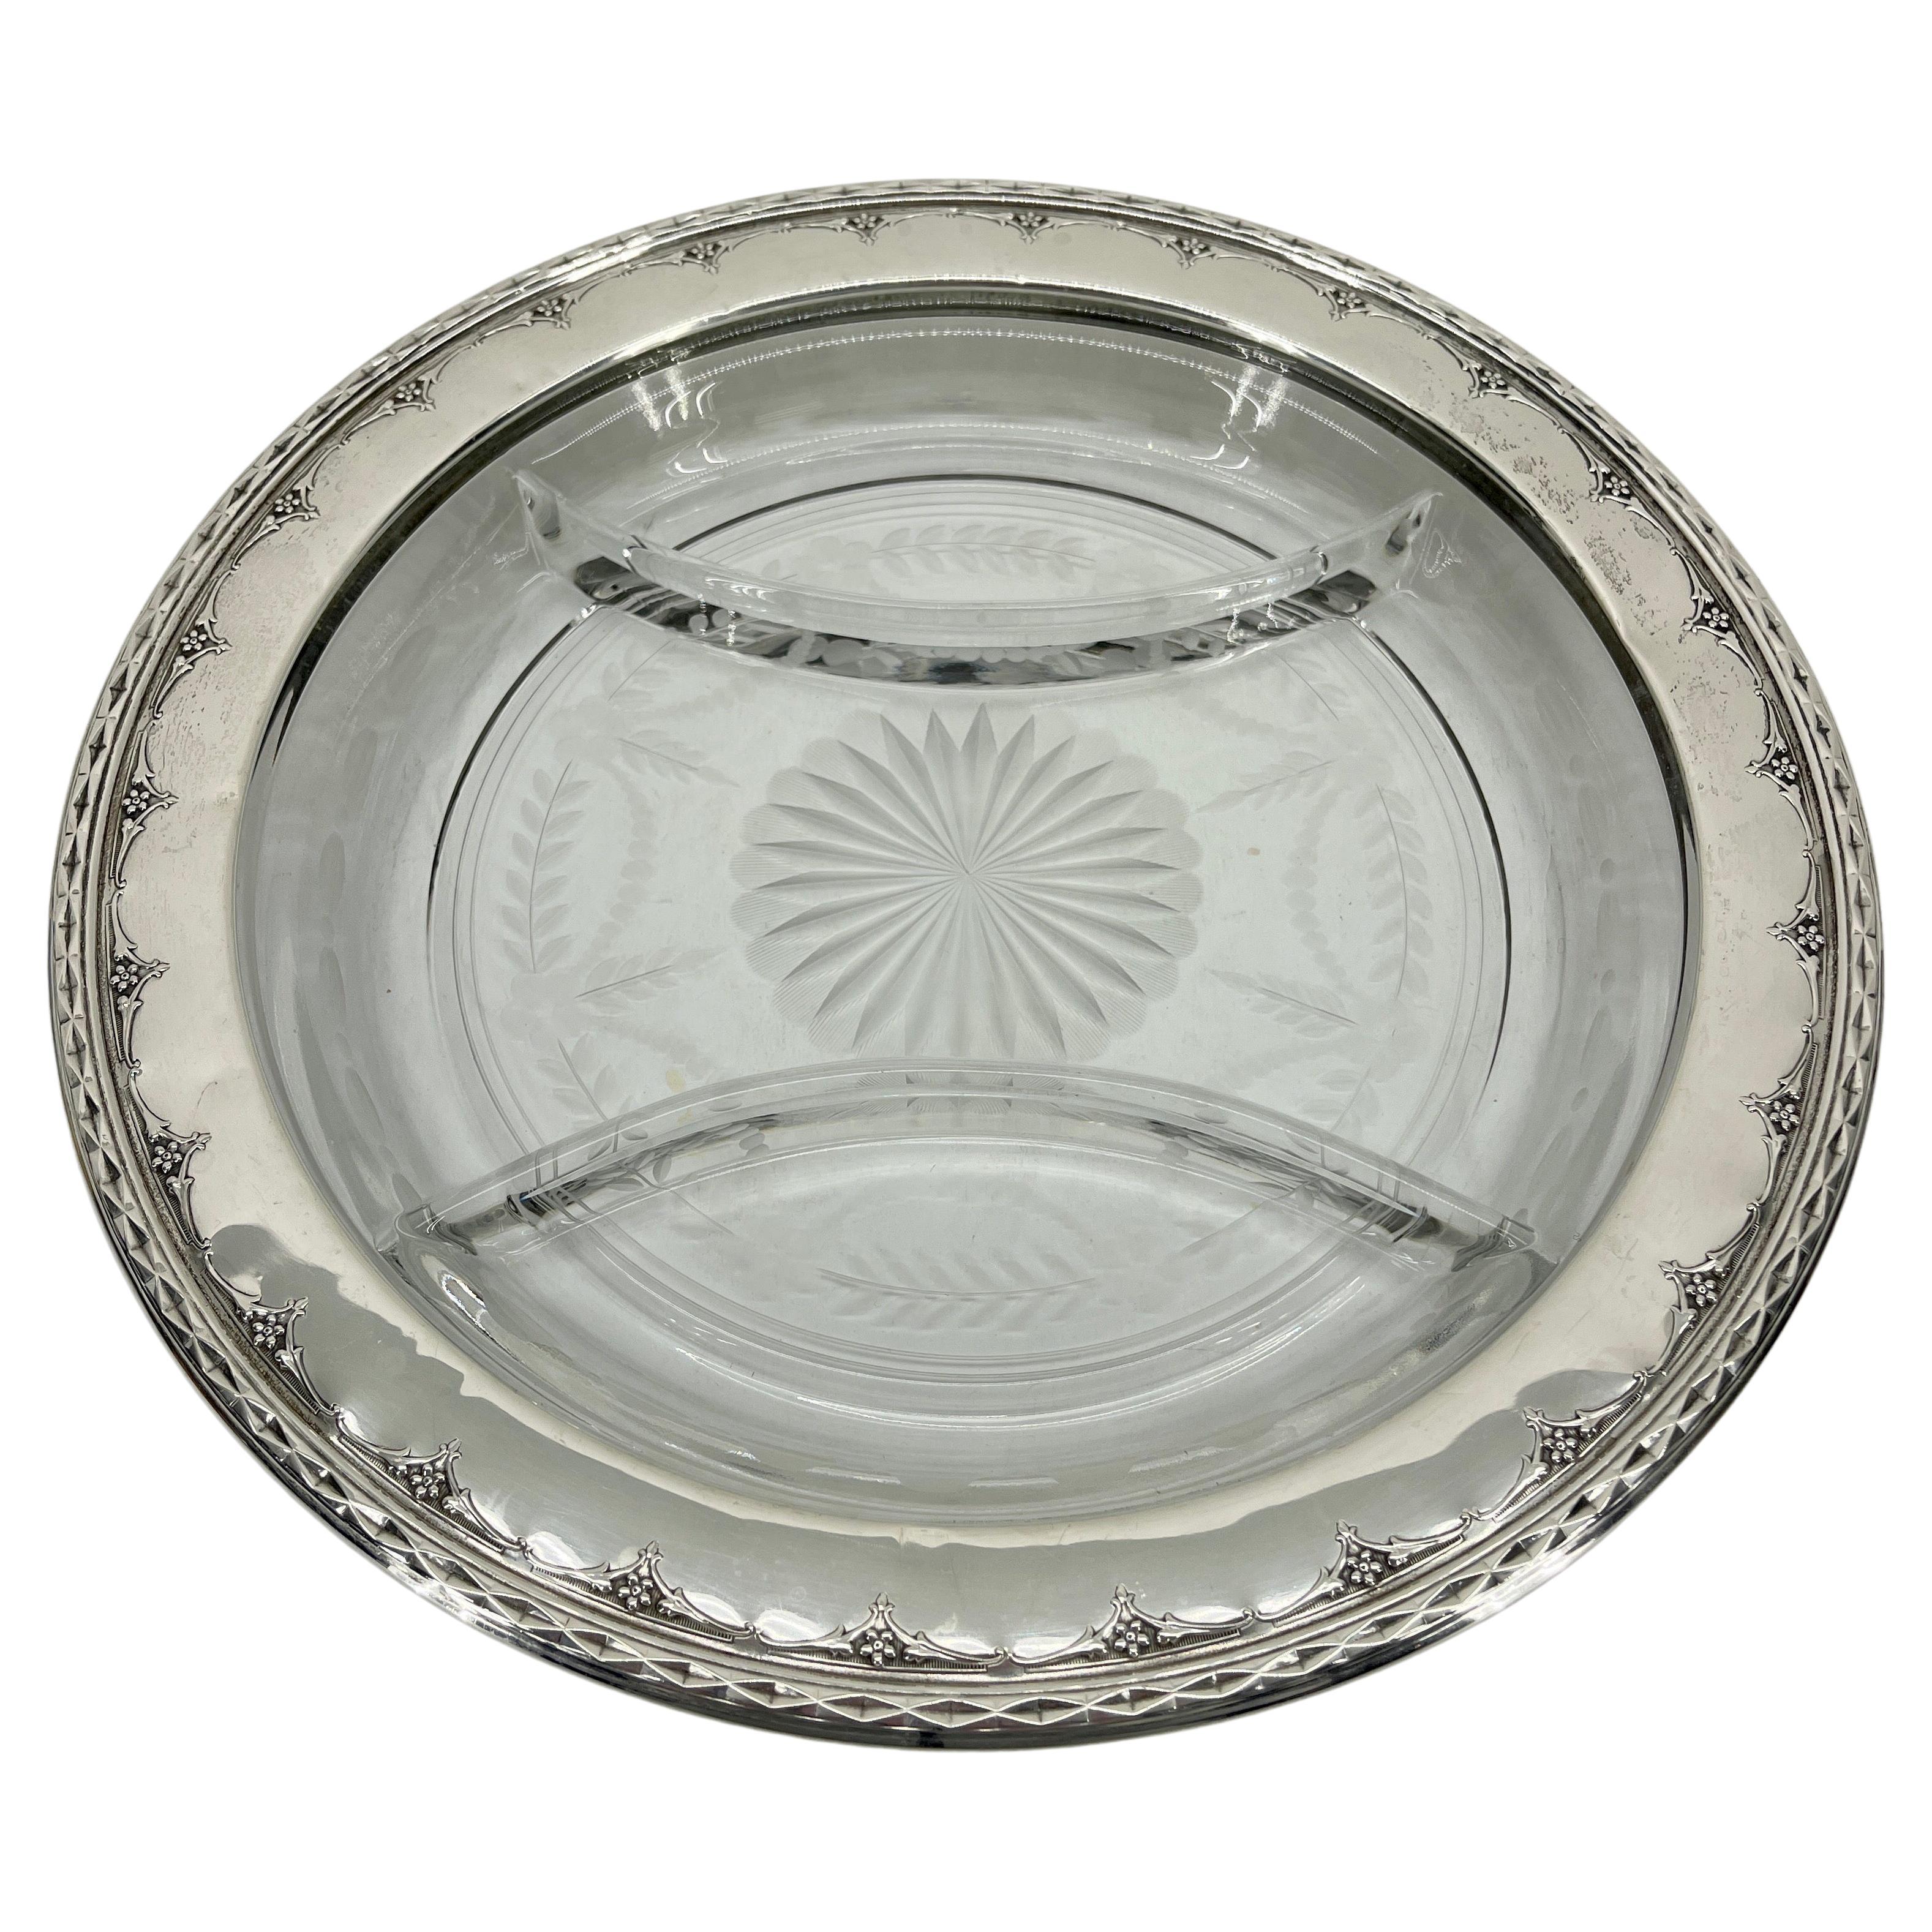 Hand-Crafted Neoclassical Sterling Silver and Cut Glass Crudite Tray by Wallace